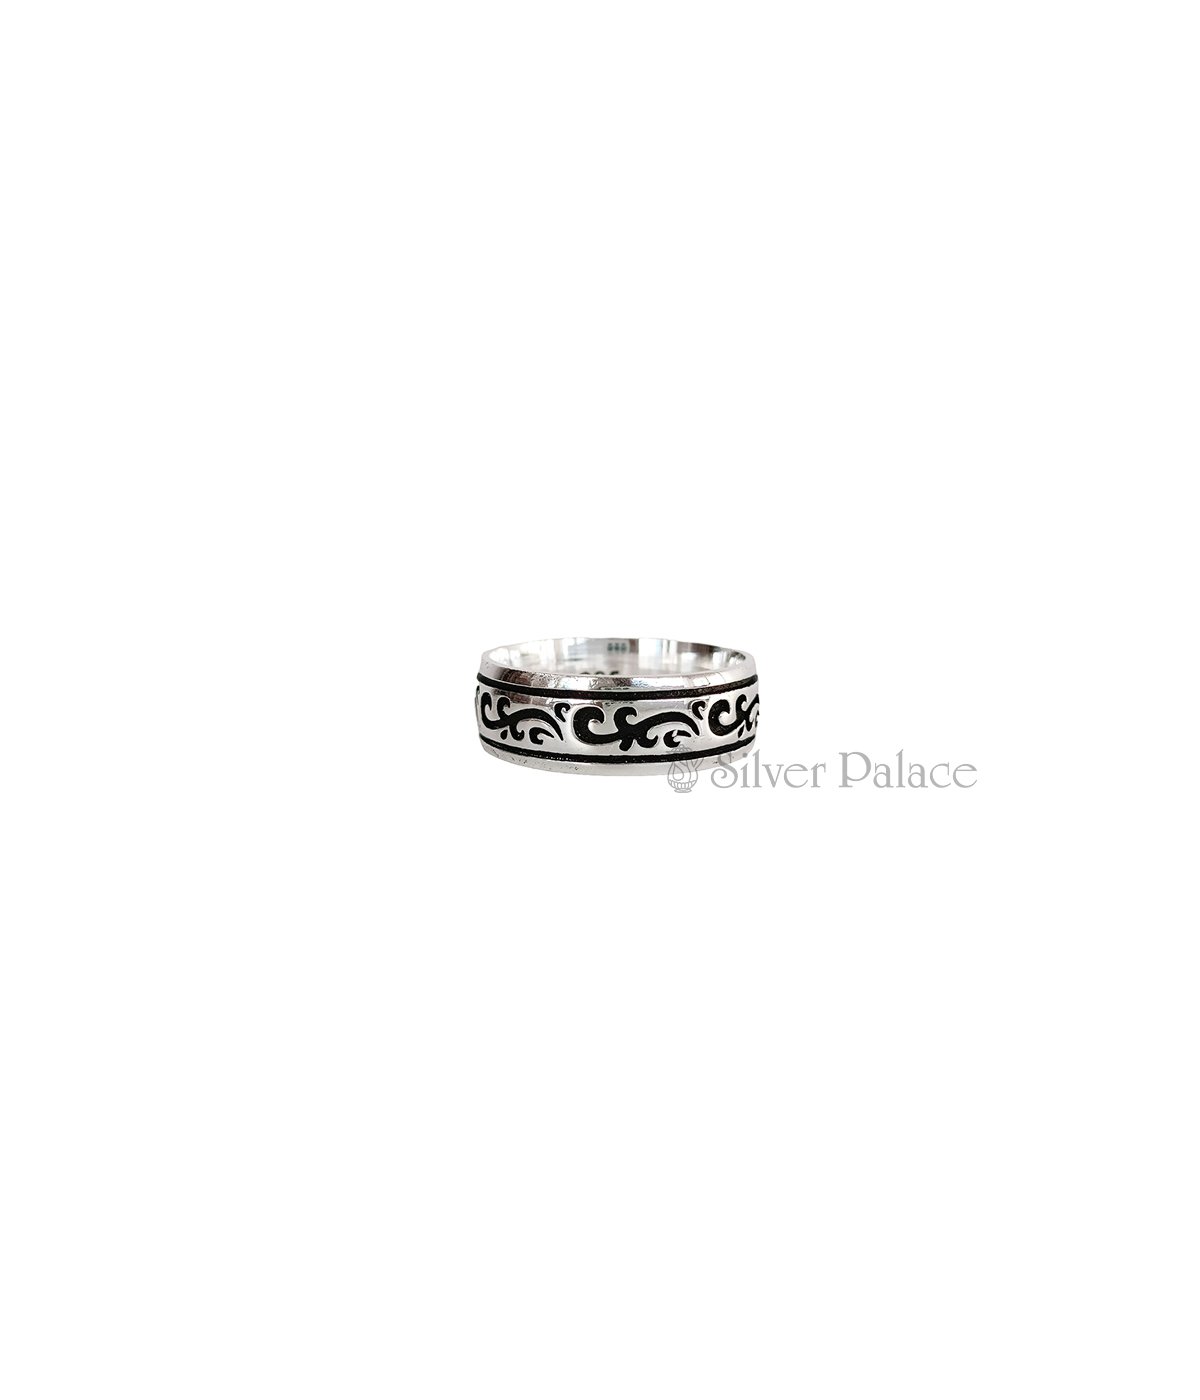 SILVER OXIDIZED FLORAL DESIGNED BAND RING FOR MEN